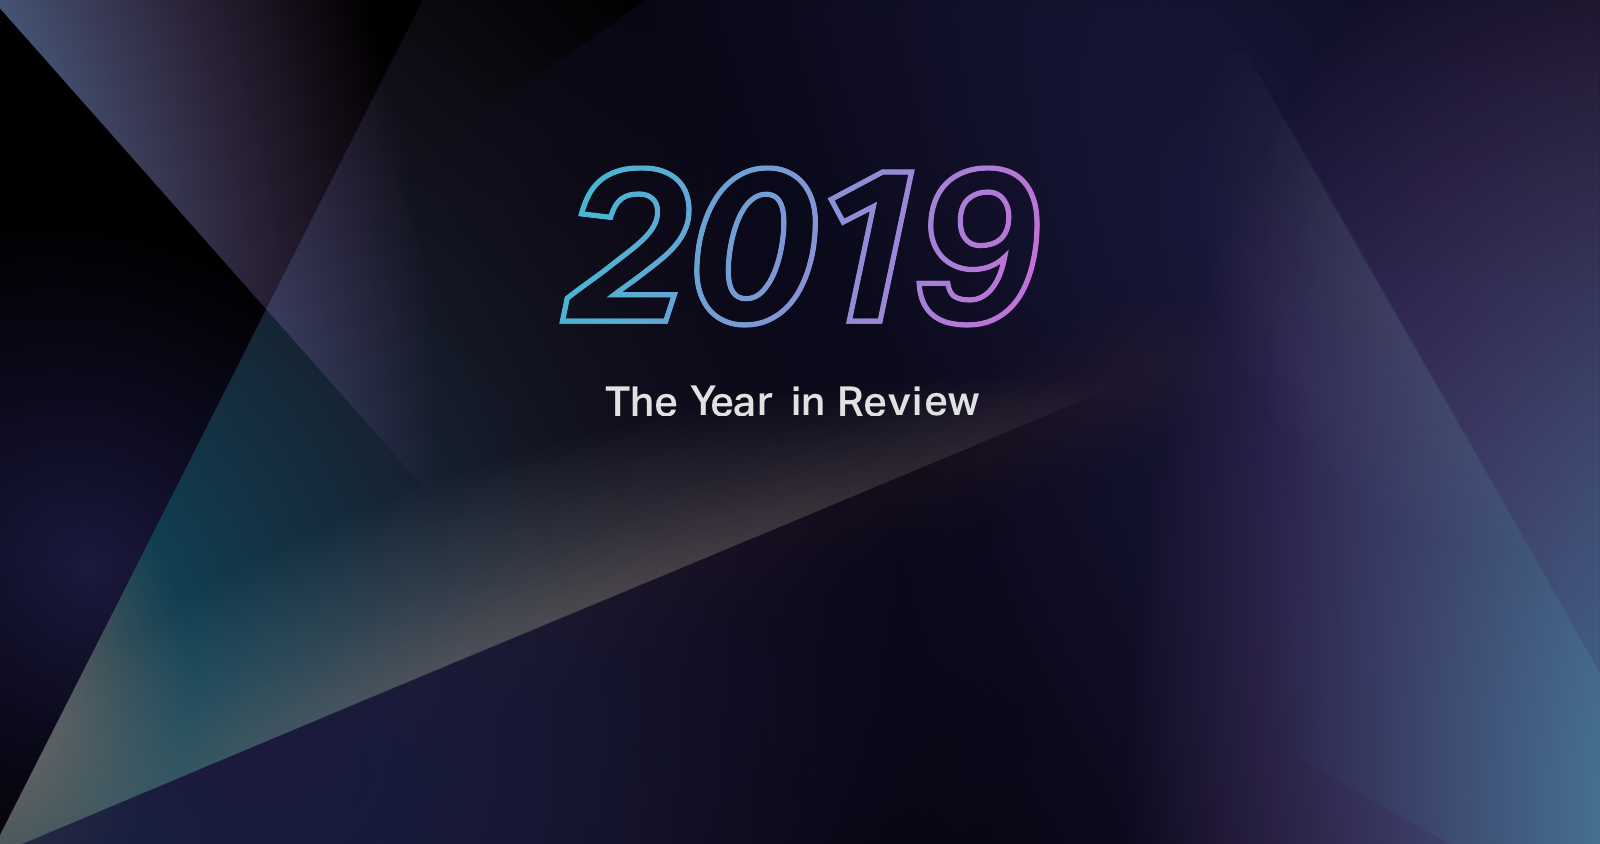 Our 2019 Year in Review – Looking Ahead to a New Era